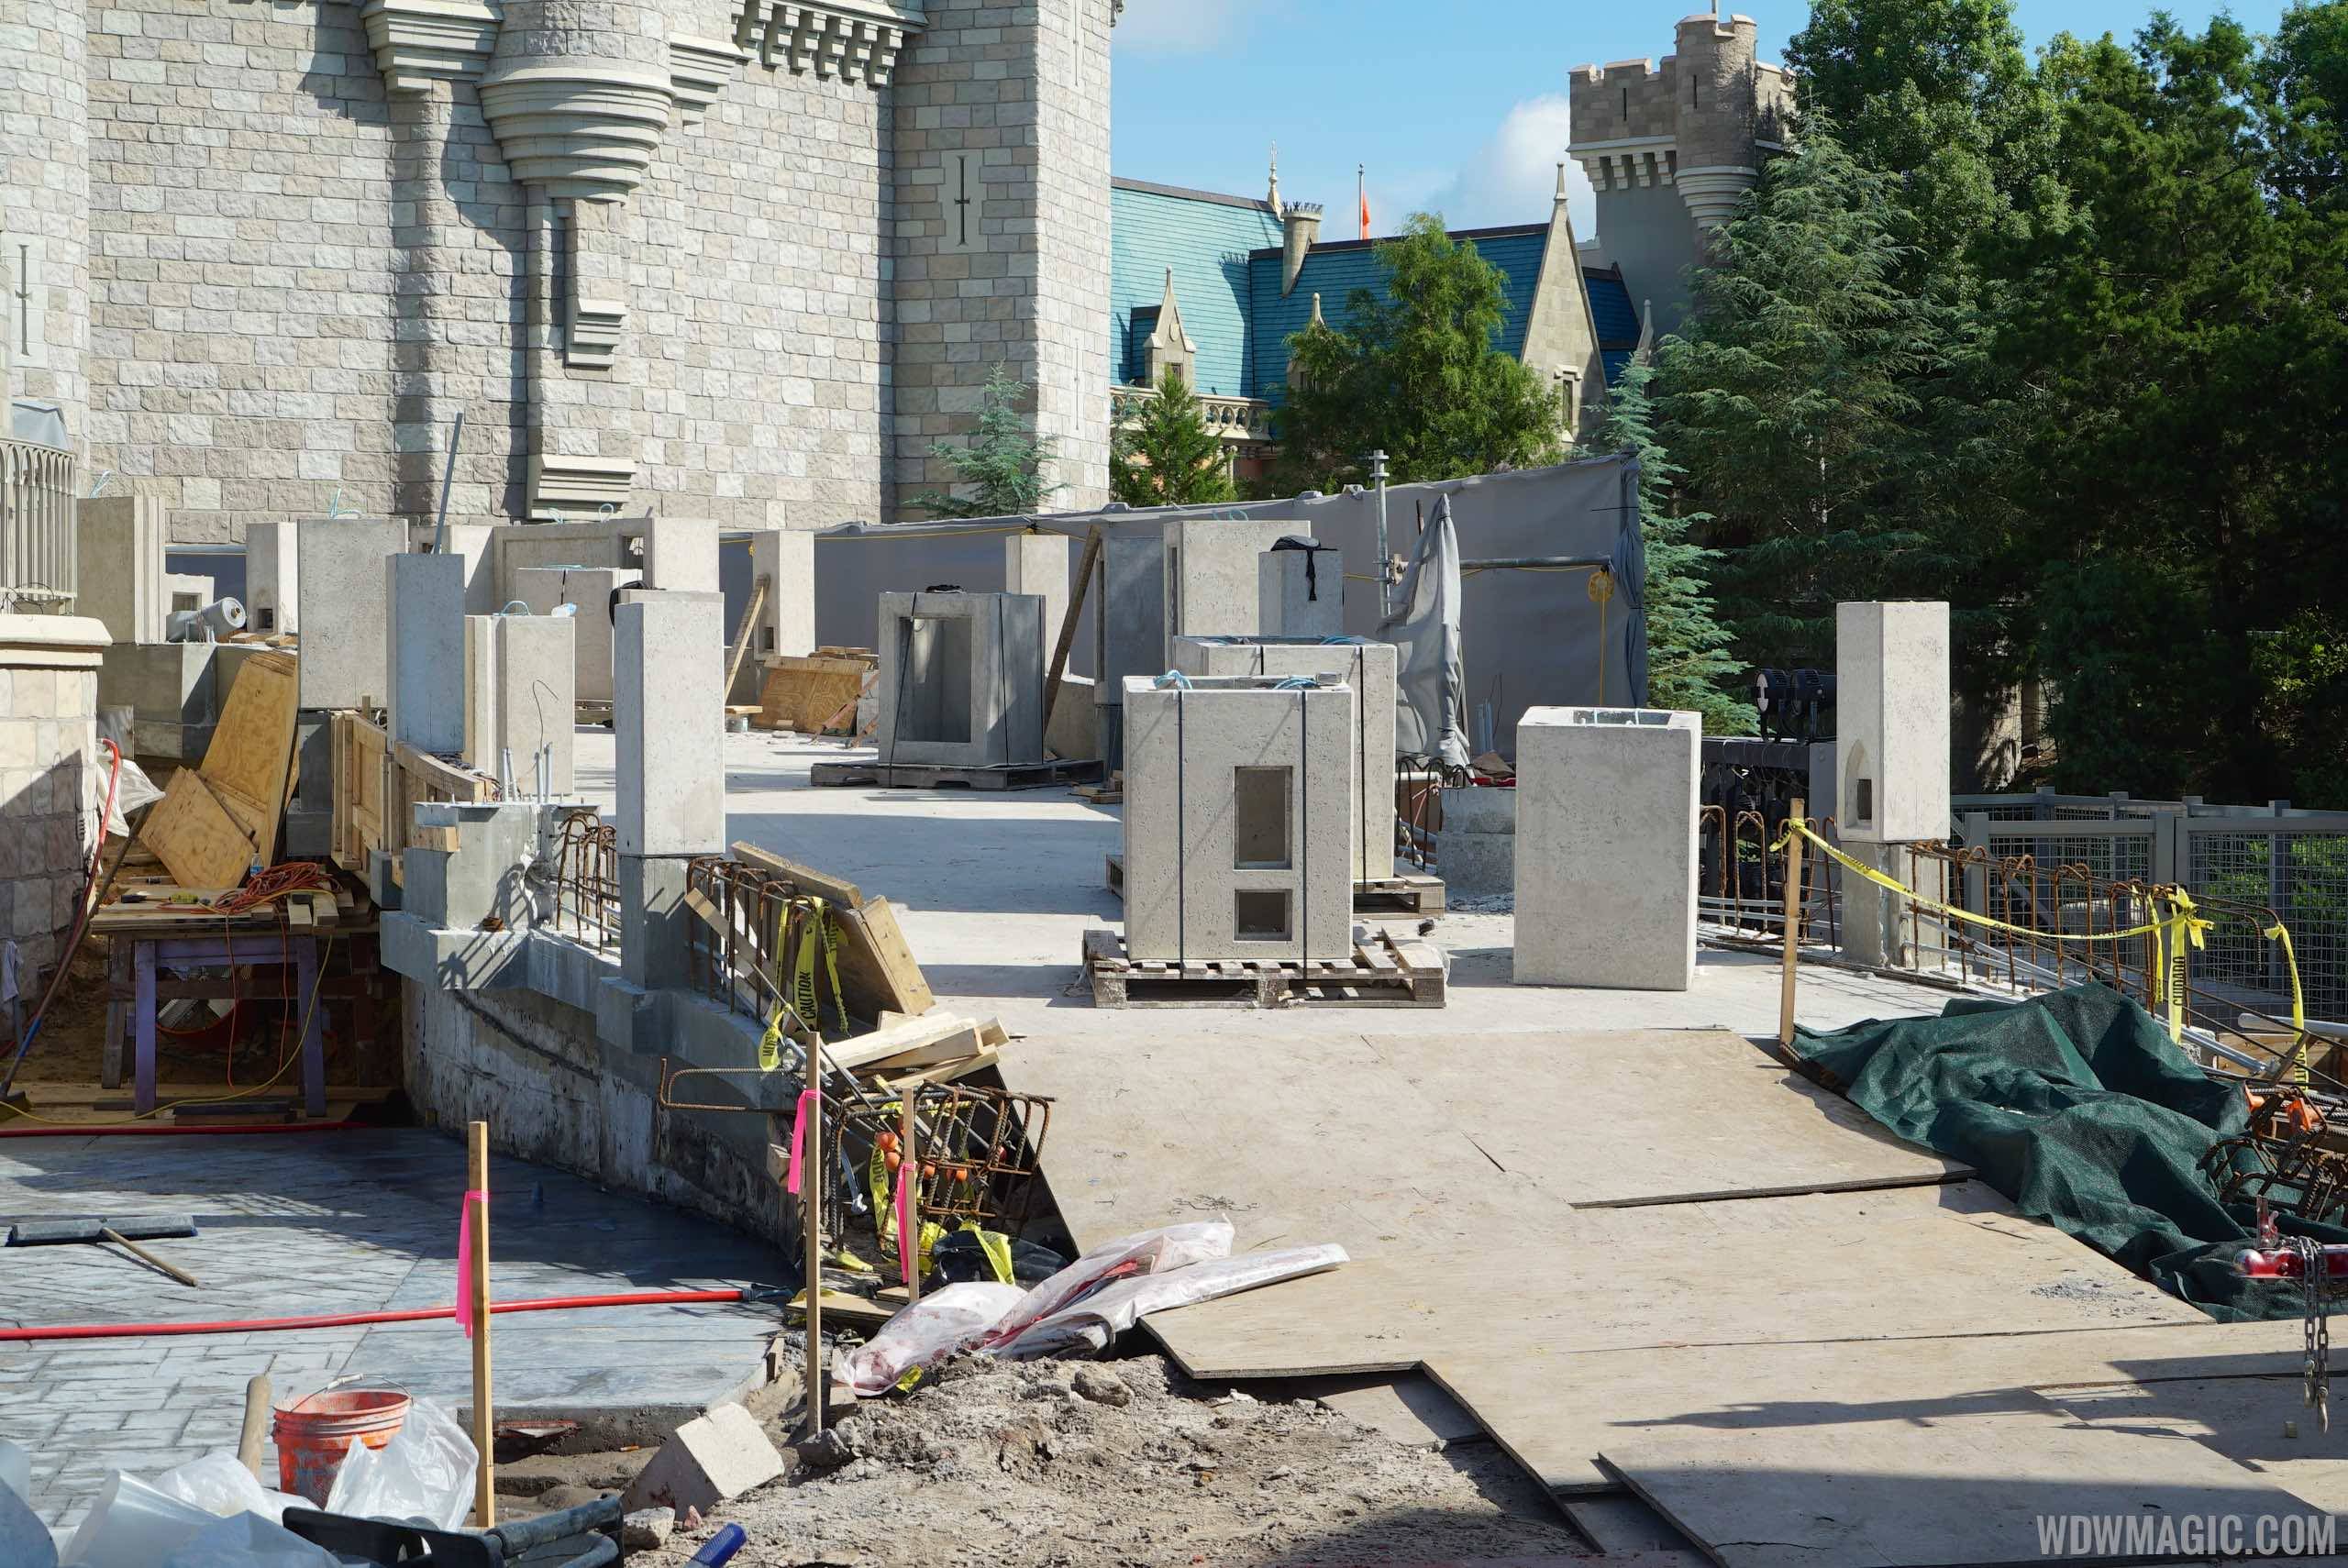 Cinderella Castle turret and forecourt construction